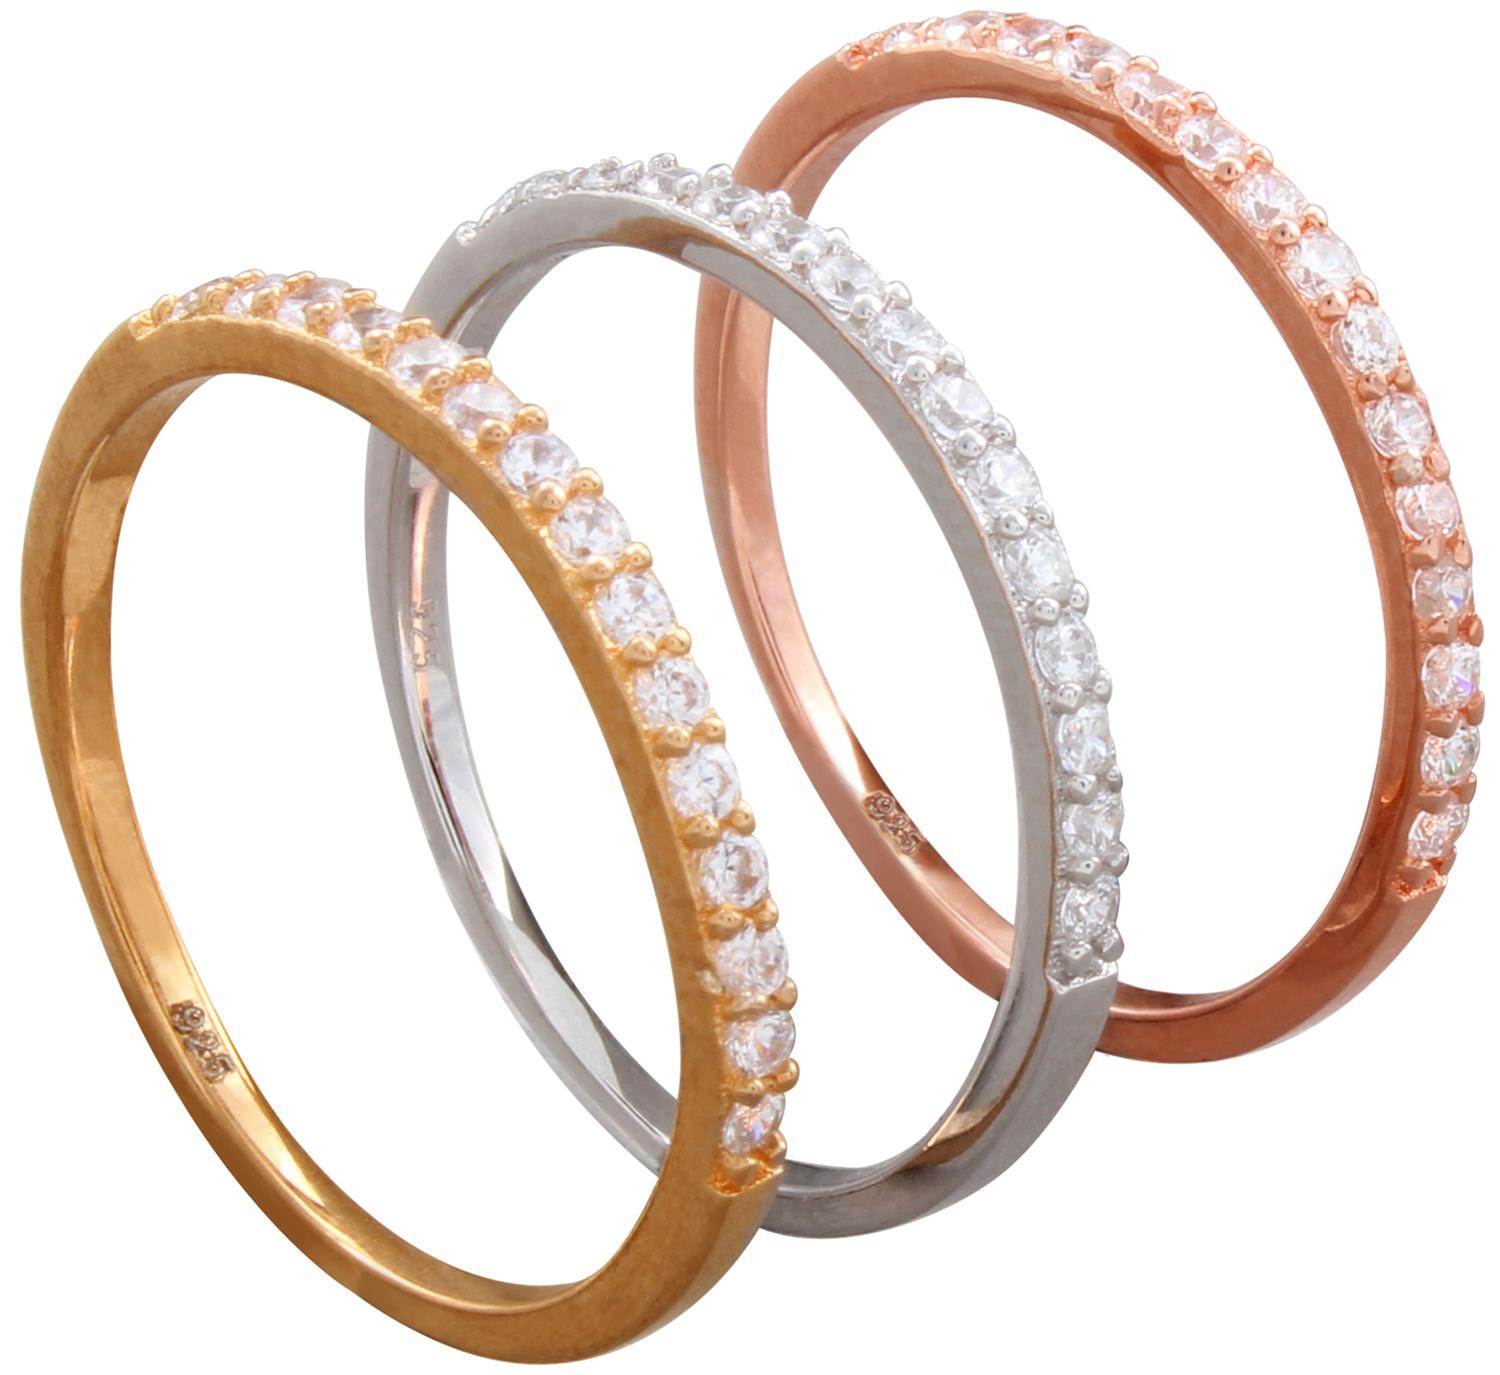 Ring - Set of 3 Tricolour